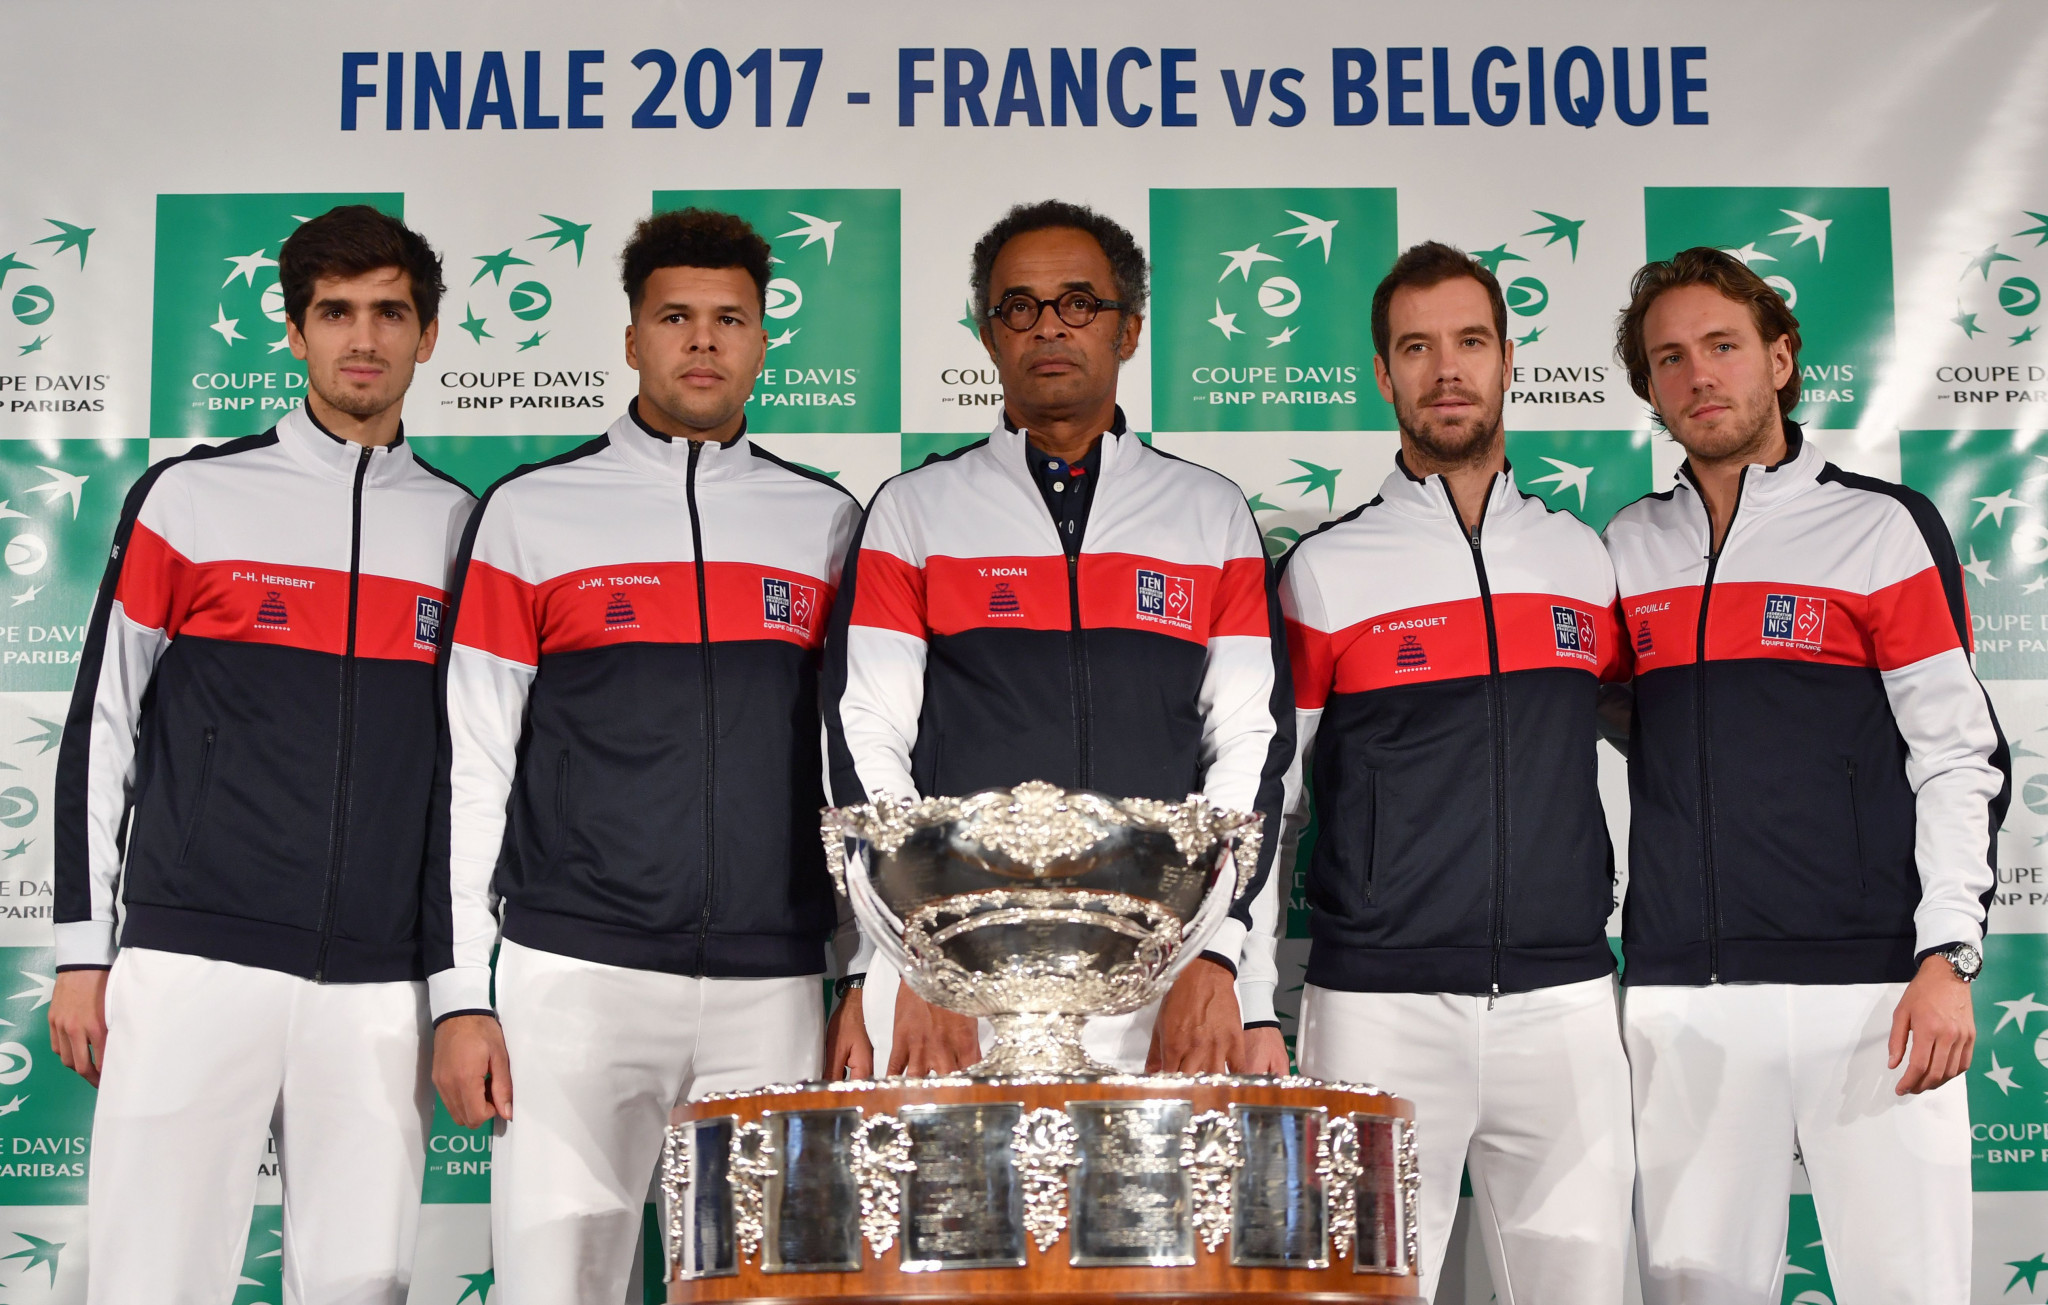 France's captain Yannick Noah (C) poses with his players (LtoR) Pierre-Hugues Herbert, Jo-Wilfried Tsonga, Richard Gasquet and Lucas Pouille during the team presentation in Villeneuve-d'Ascq on November 23, 2017, ahead of the Davis Cup World Group final between France and Belgium ©Getty Images